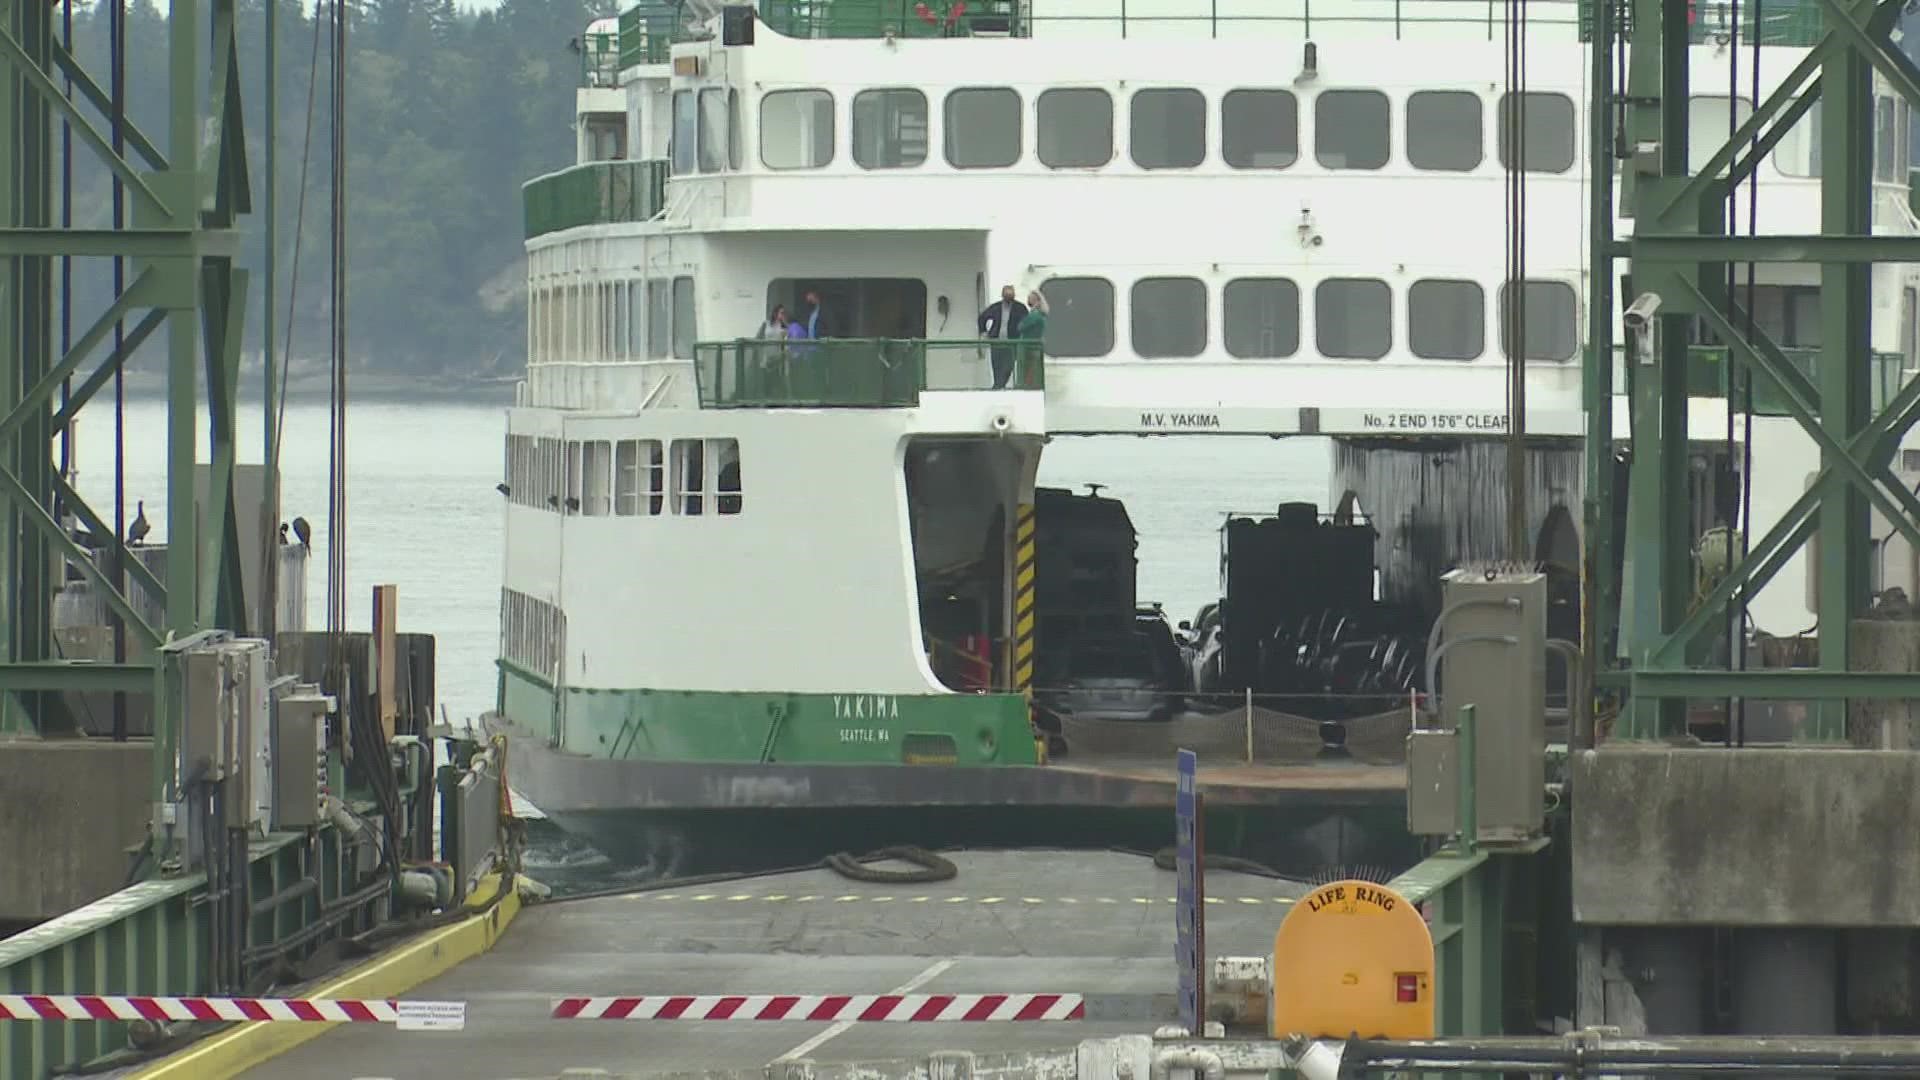 The cancellations come after weeks of rumors of Washington State Ferry employees staging a “sick-out” to protest the governor’s COVID-19 vaccine mandate.